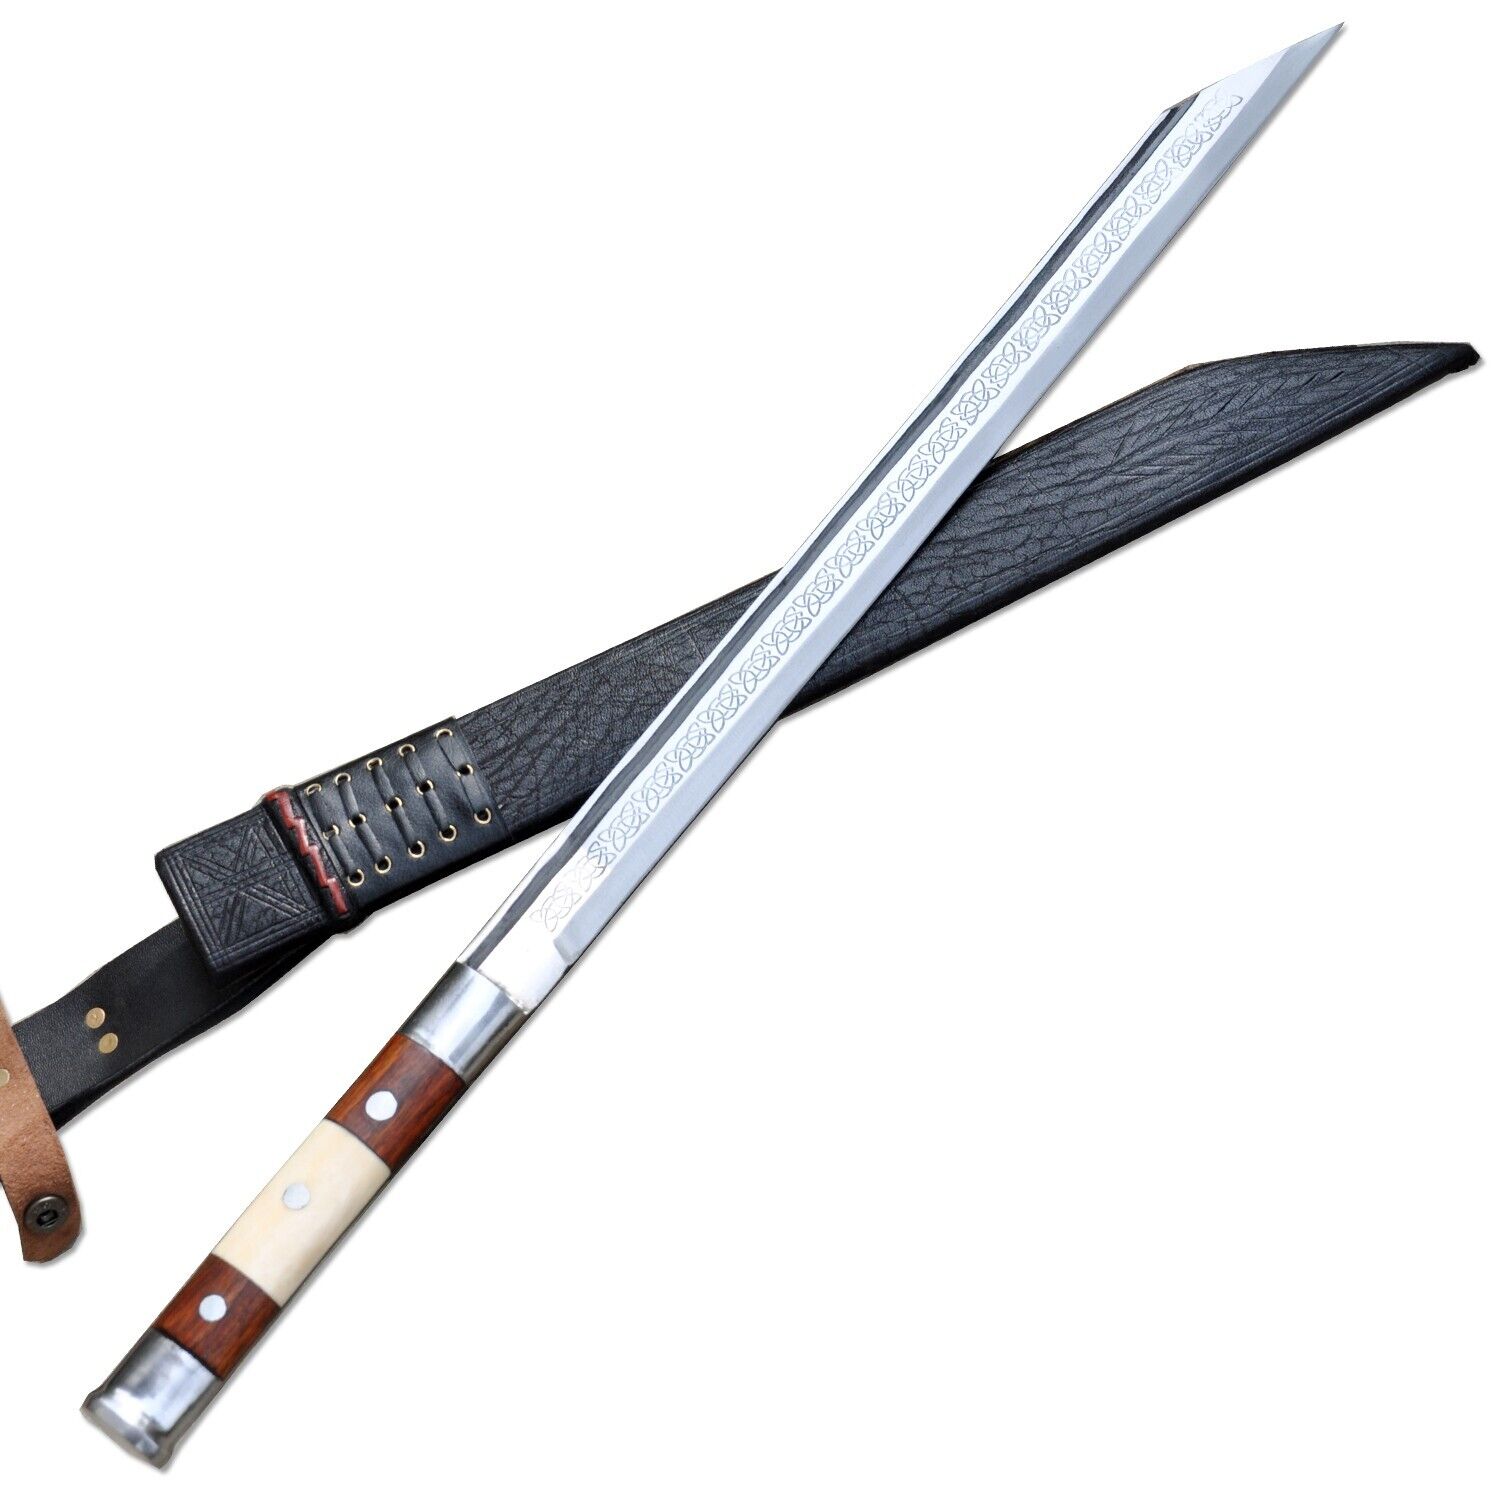 Seax sword-18 inches Germany sword-Forged-Tempered-sharpen-Viking-short sword